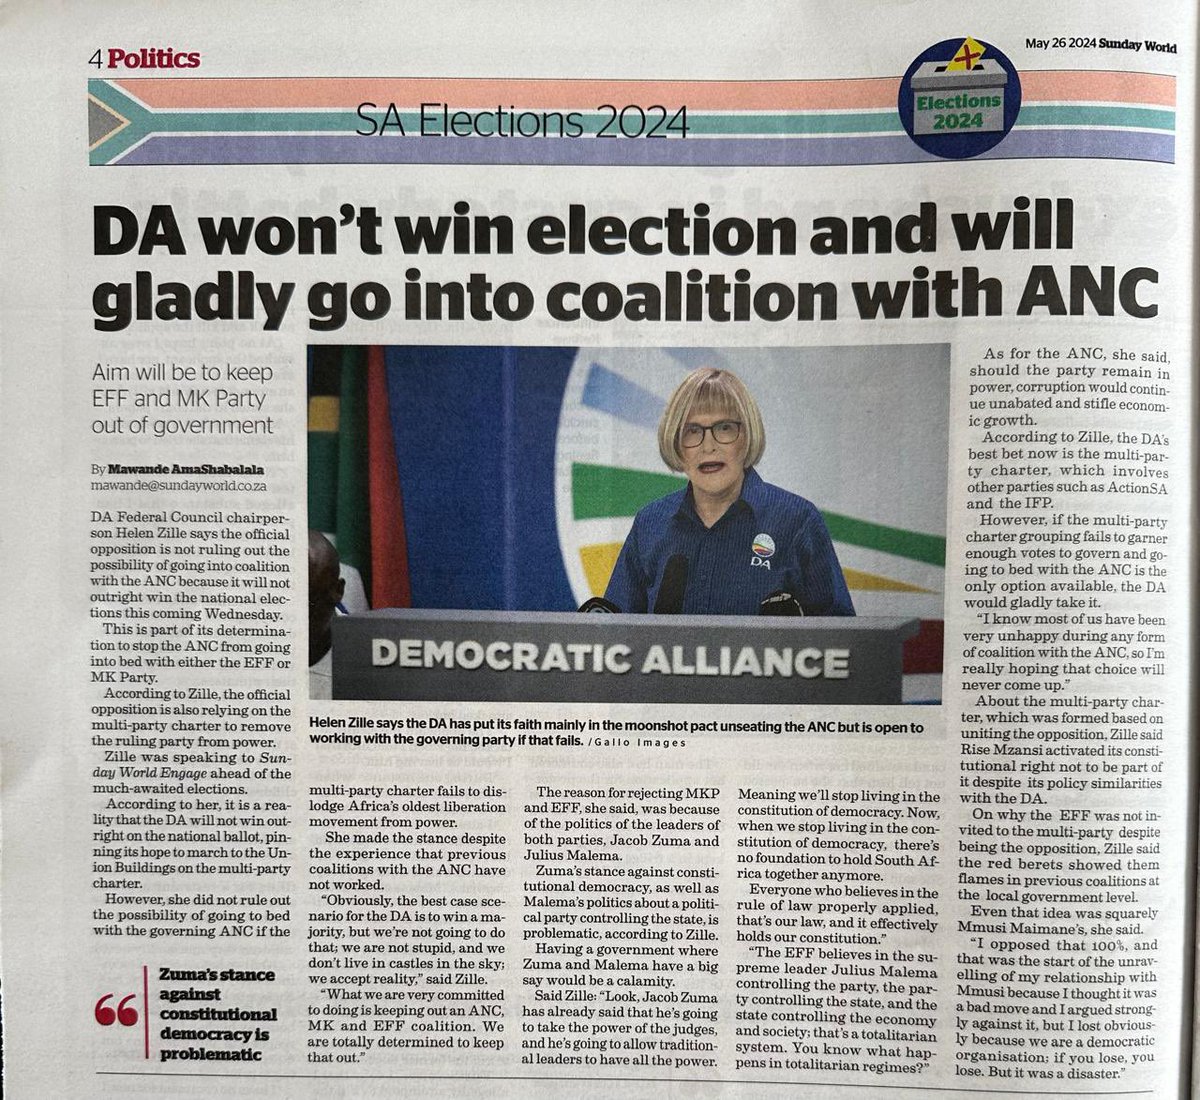 In the 1st election where South Africans will deny the ANC a majority, it is fraud to give back votes to the same party from which a party claims to 'Rescue South Africa' @Action4SA offers a guarantee that no vote for ActionSA will be betrayed to keep the ANC in office.